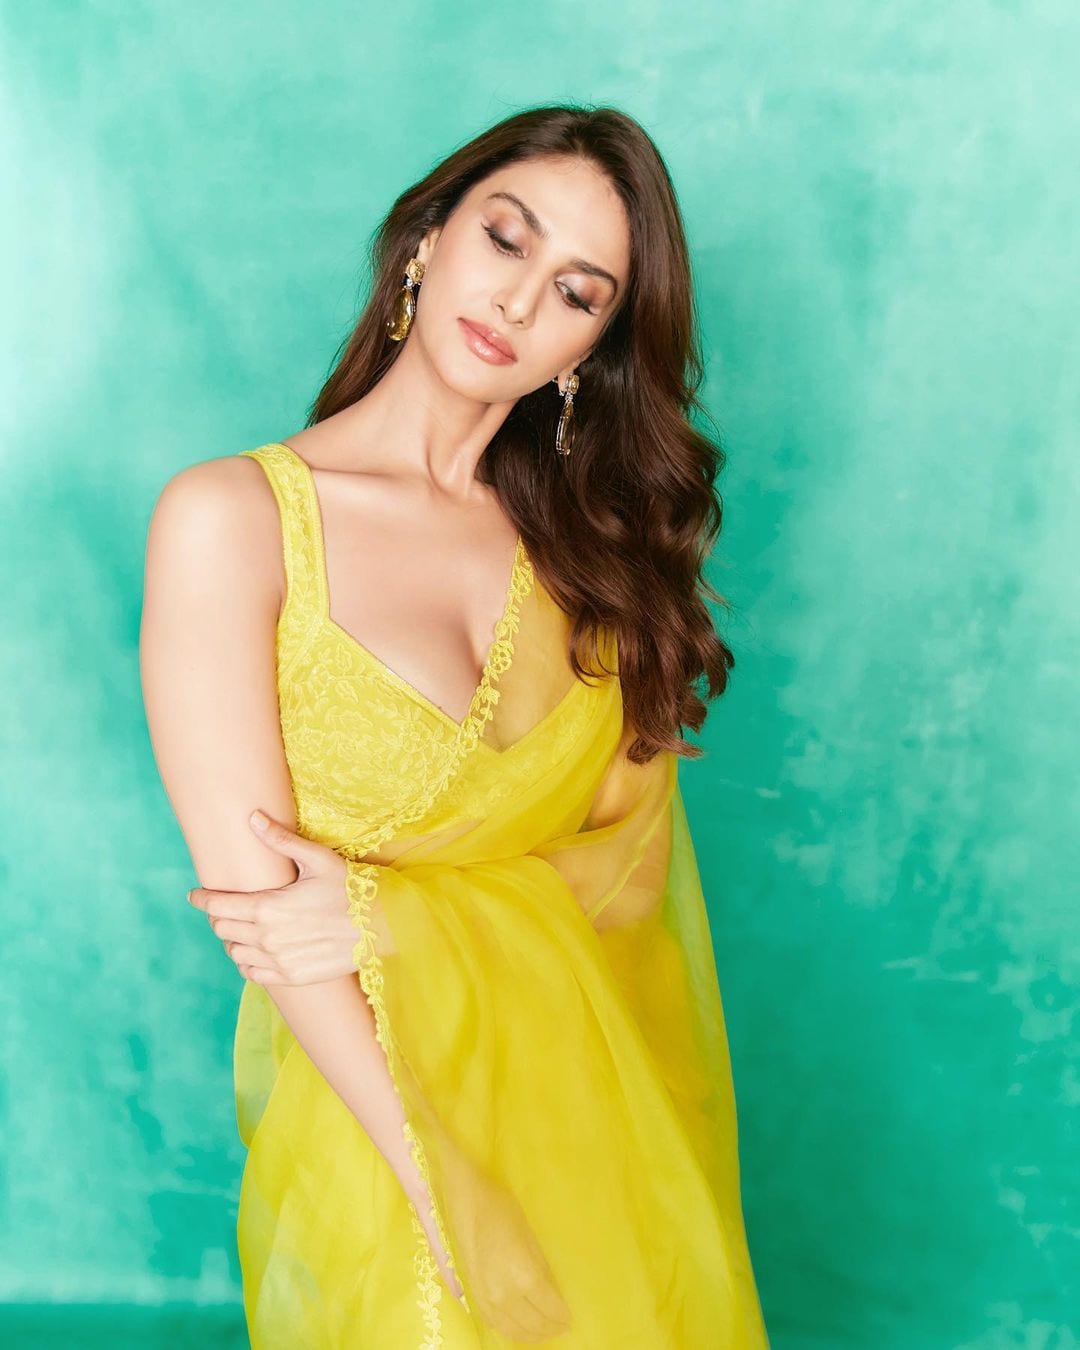 The actor looked all bright and happy in this picture where she donned a sheer yellow saree. She also gave some subtle poses, making it look quite dreamy